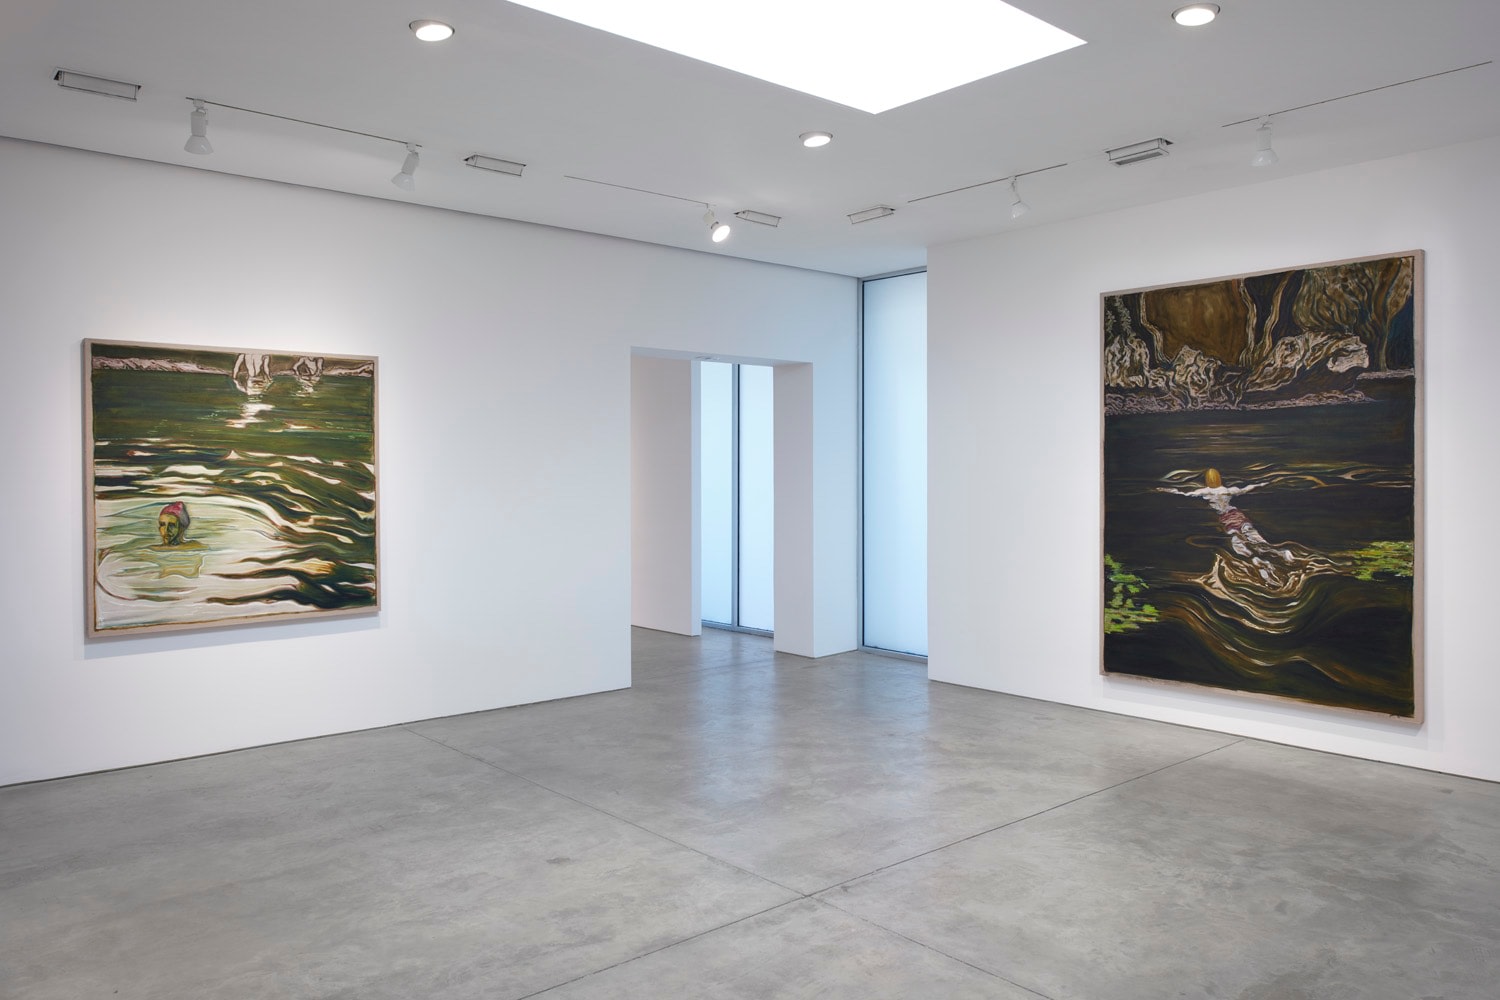 Installation view of Billy Childish exhibition at Lehmann Maupin gallery, New York, 2020, view 3